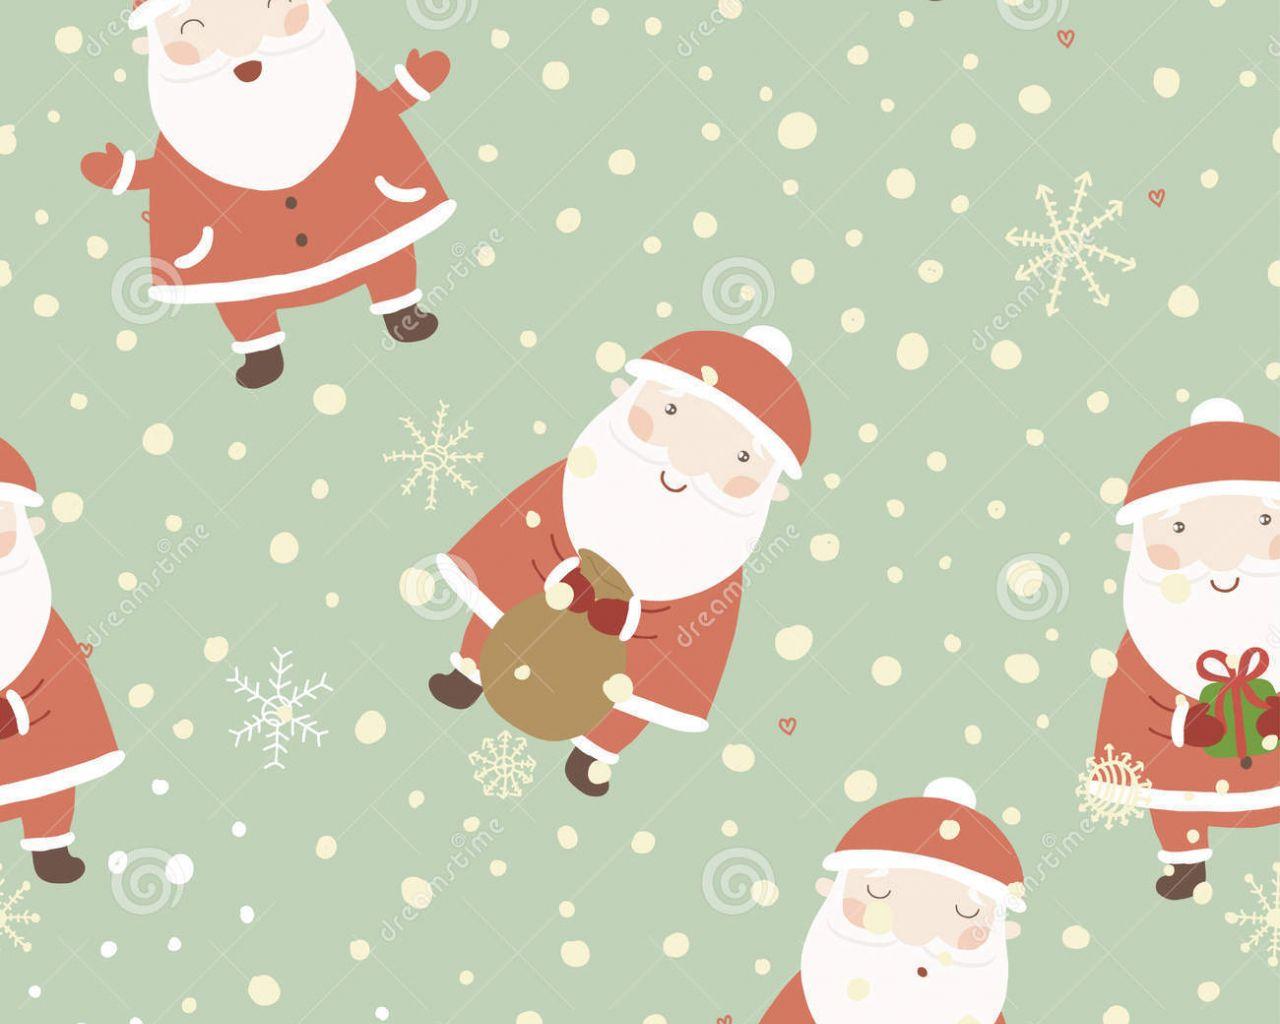 50 Free Christmas Wallpaper Backgrounds For Your iPhone  Merry christmas  wallpaper Christmas phone wallpaper Wallpaper iphone christmas